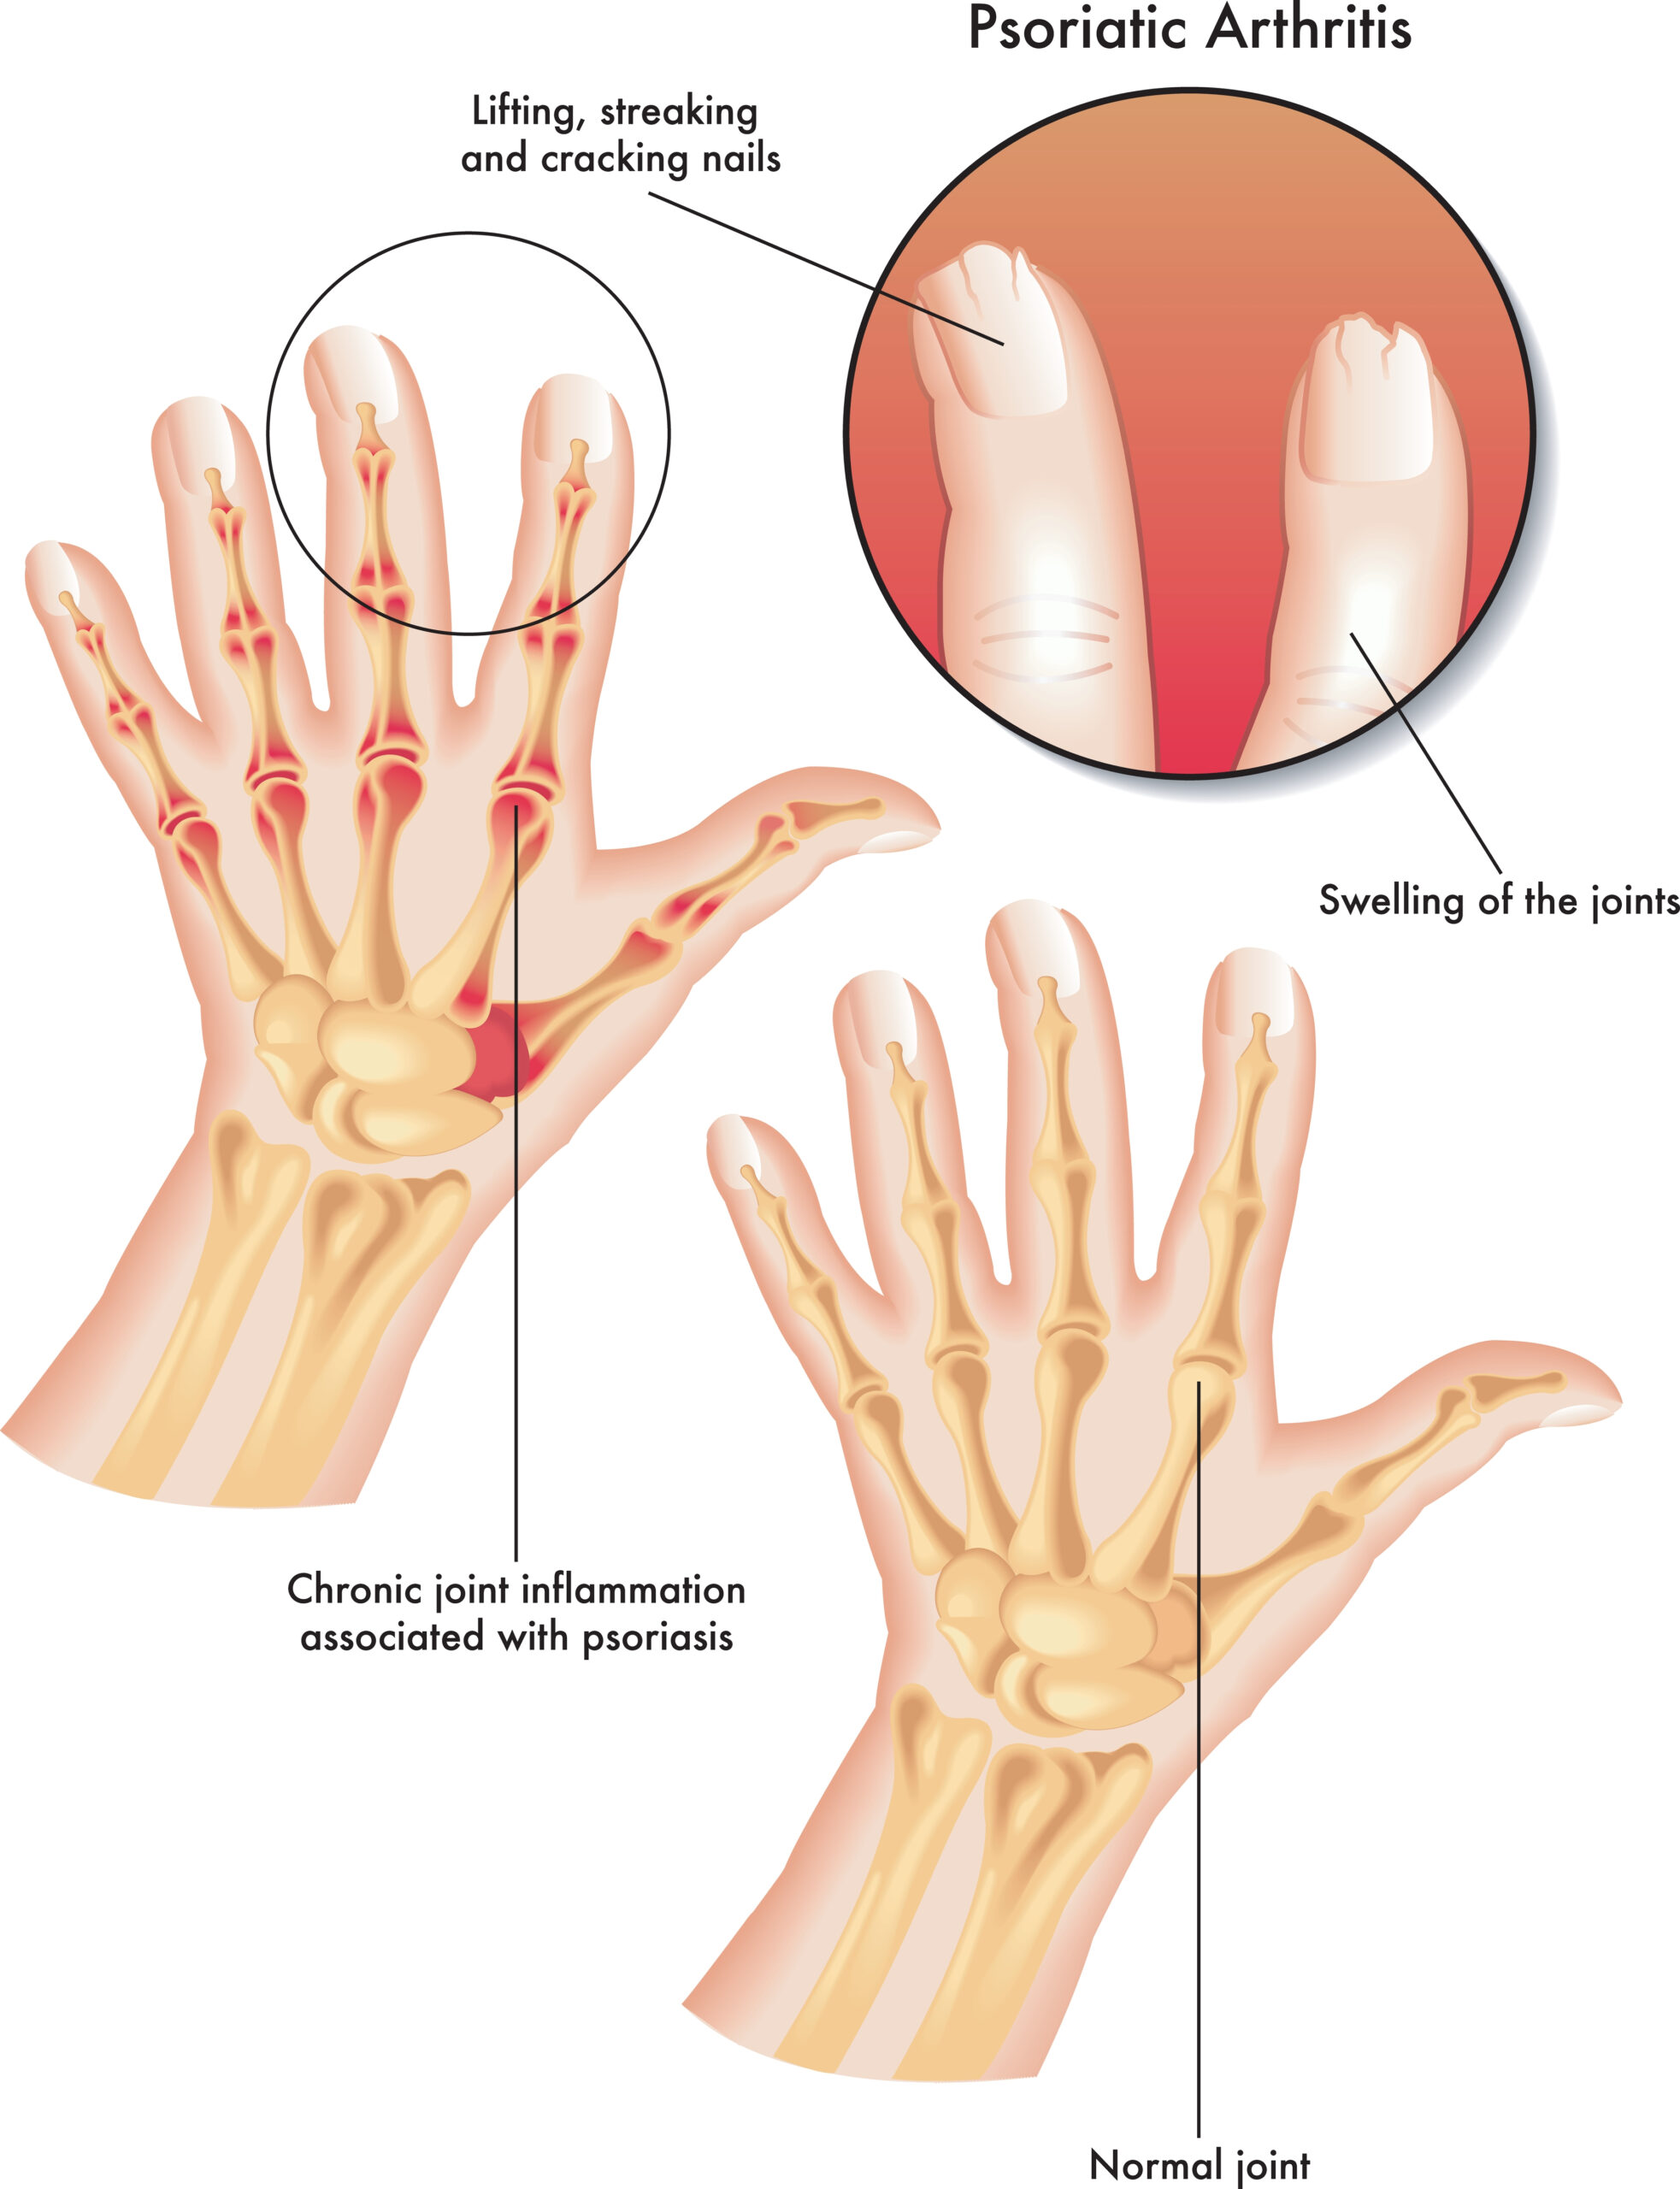 Psoriatic Arthritis: What Is, Symptoms, Diagnosis, and Treatment